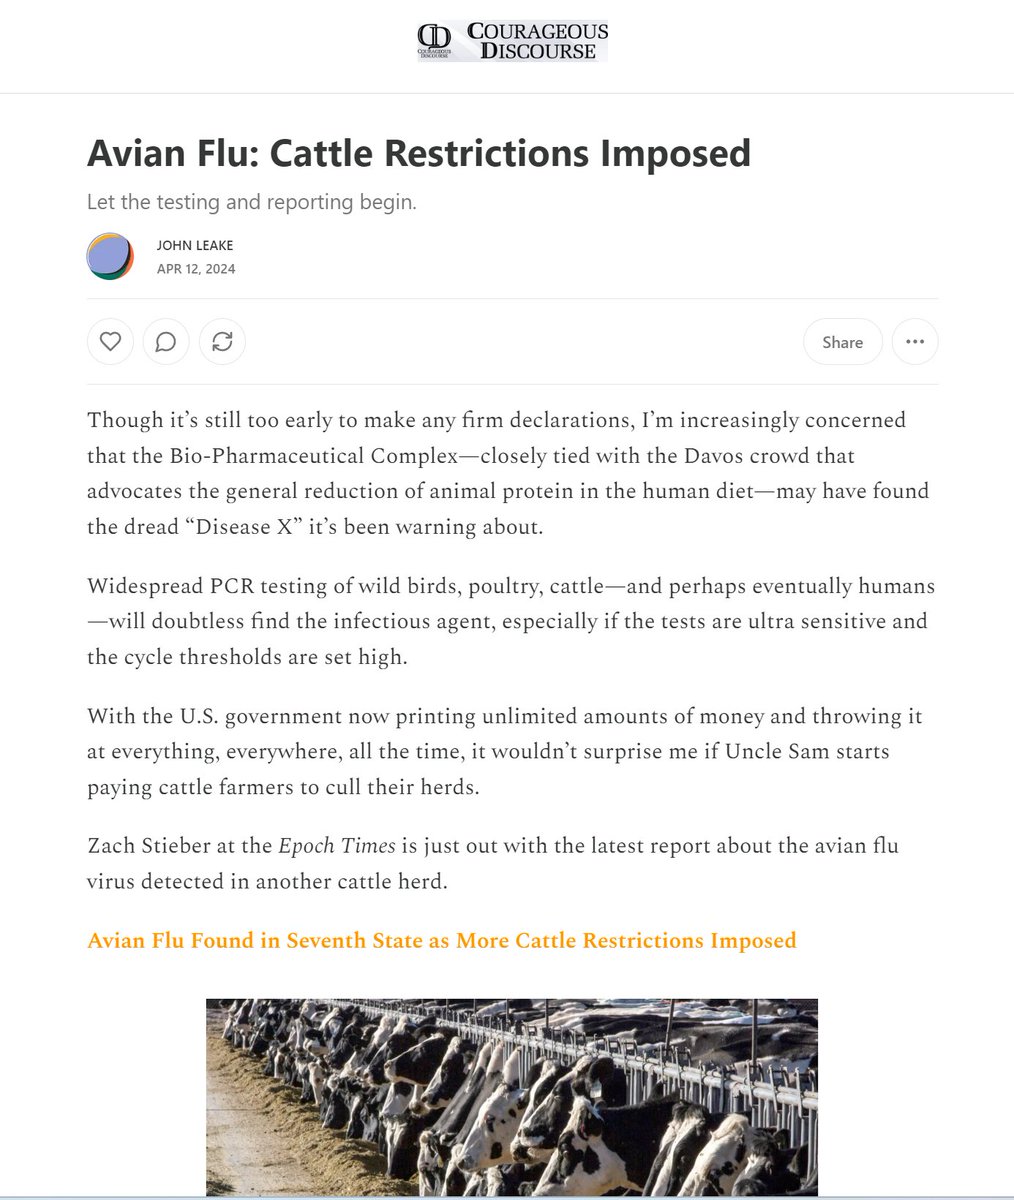 Hope everyone is ready for a diet this summer. Excessive animal PCR testing for H5N1 will drive panic and unnecessary culling of herds and flocks. Stay up to date on Courageous Discourse. @DrNoMask @twc_health open.substack.com/pub/petermccul…